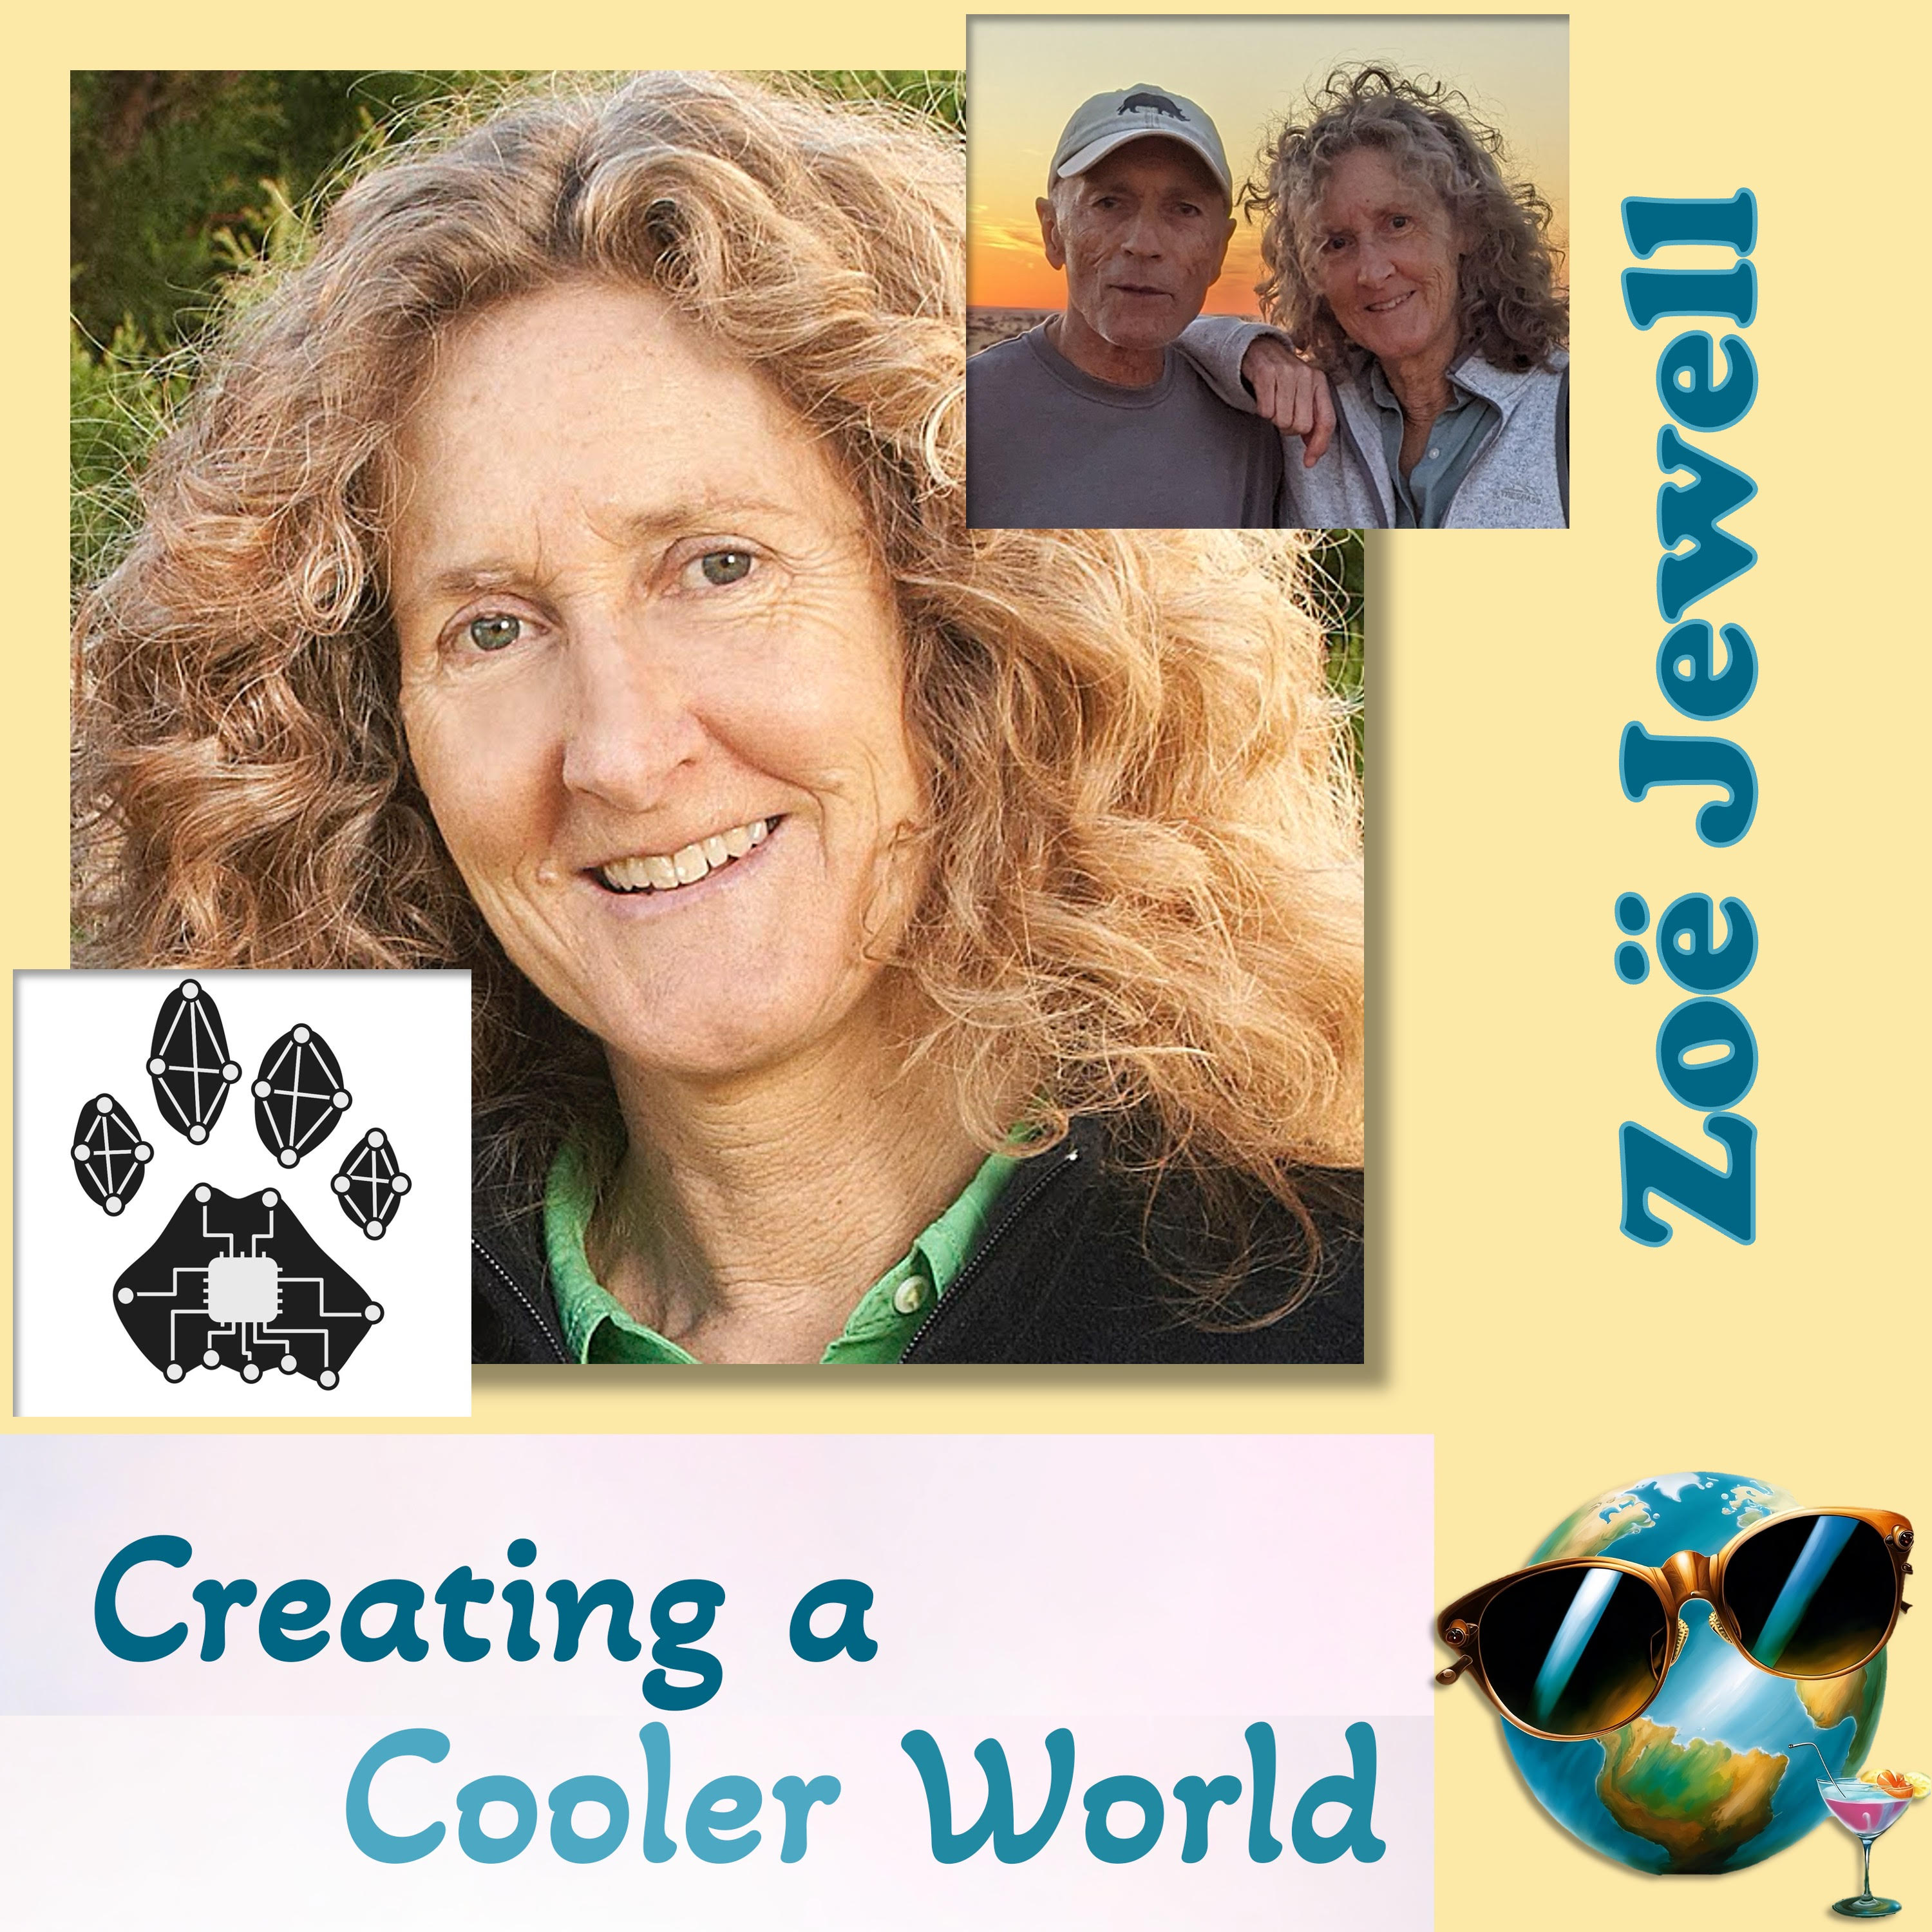 Creating a Cooler World: Podcast on our work!